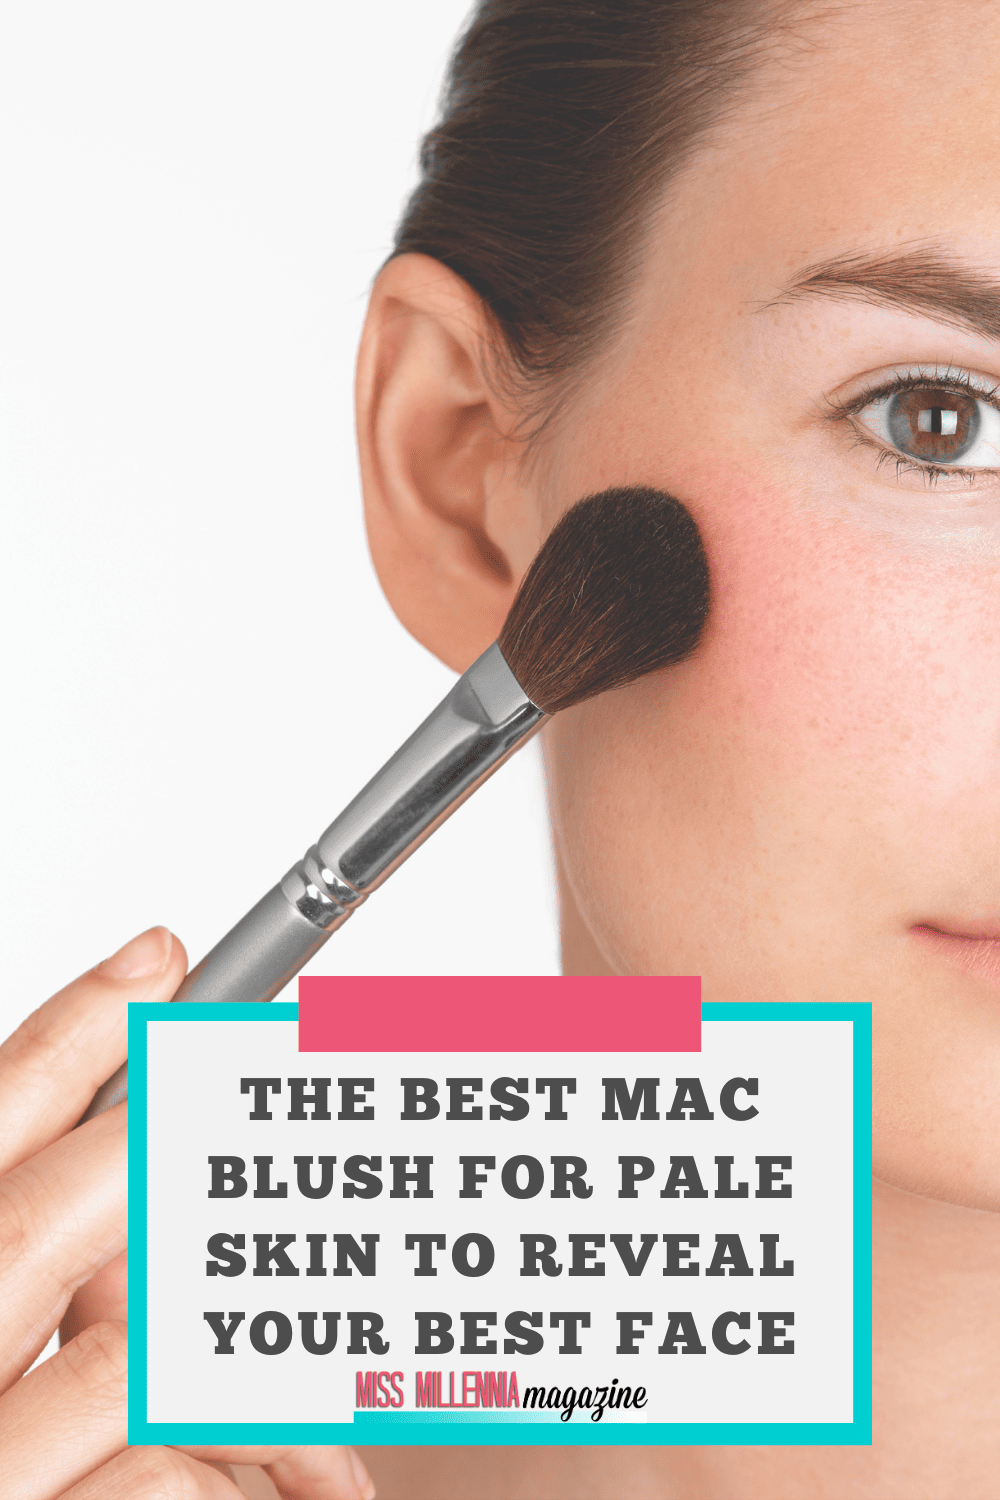 The Best MAC Blush For Pale Skin To Reveal Your Best Face (11 Options)